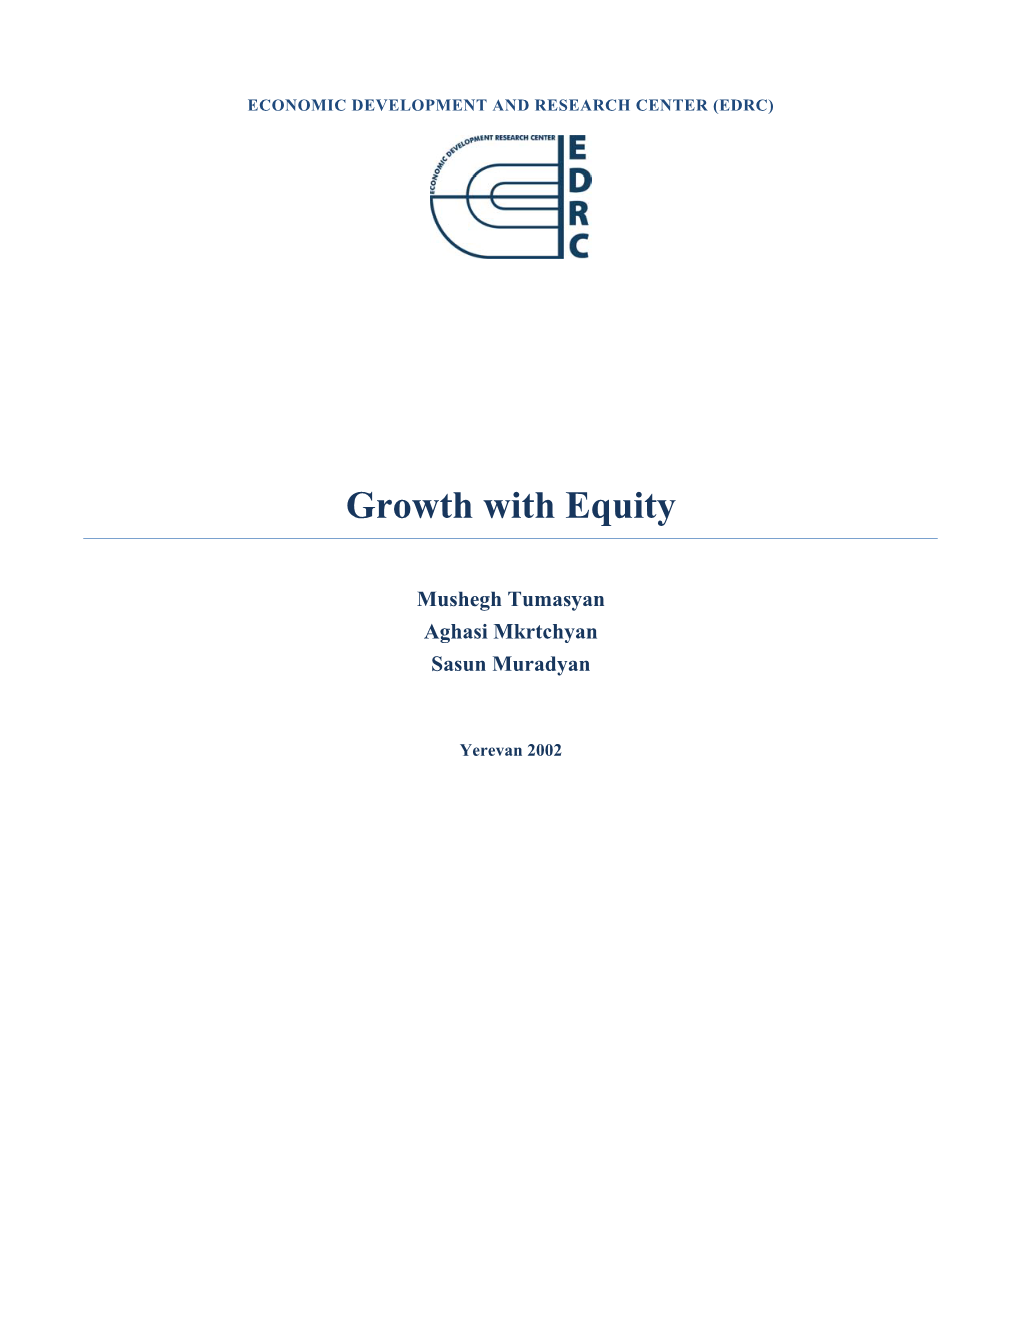 Growth with Equity: Policy Choice for Poverty Reduction Project